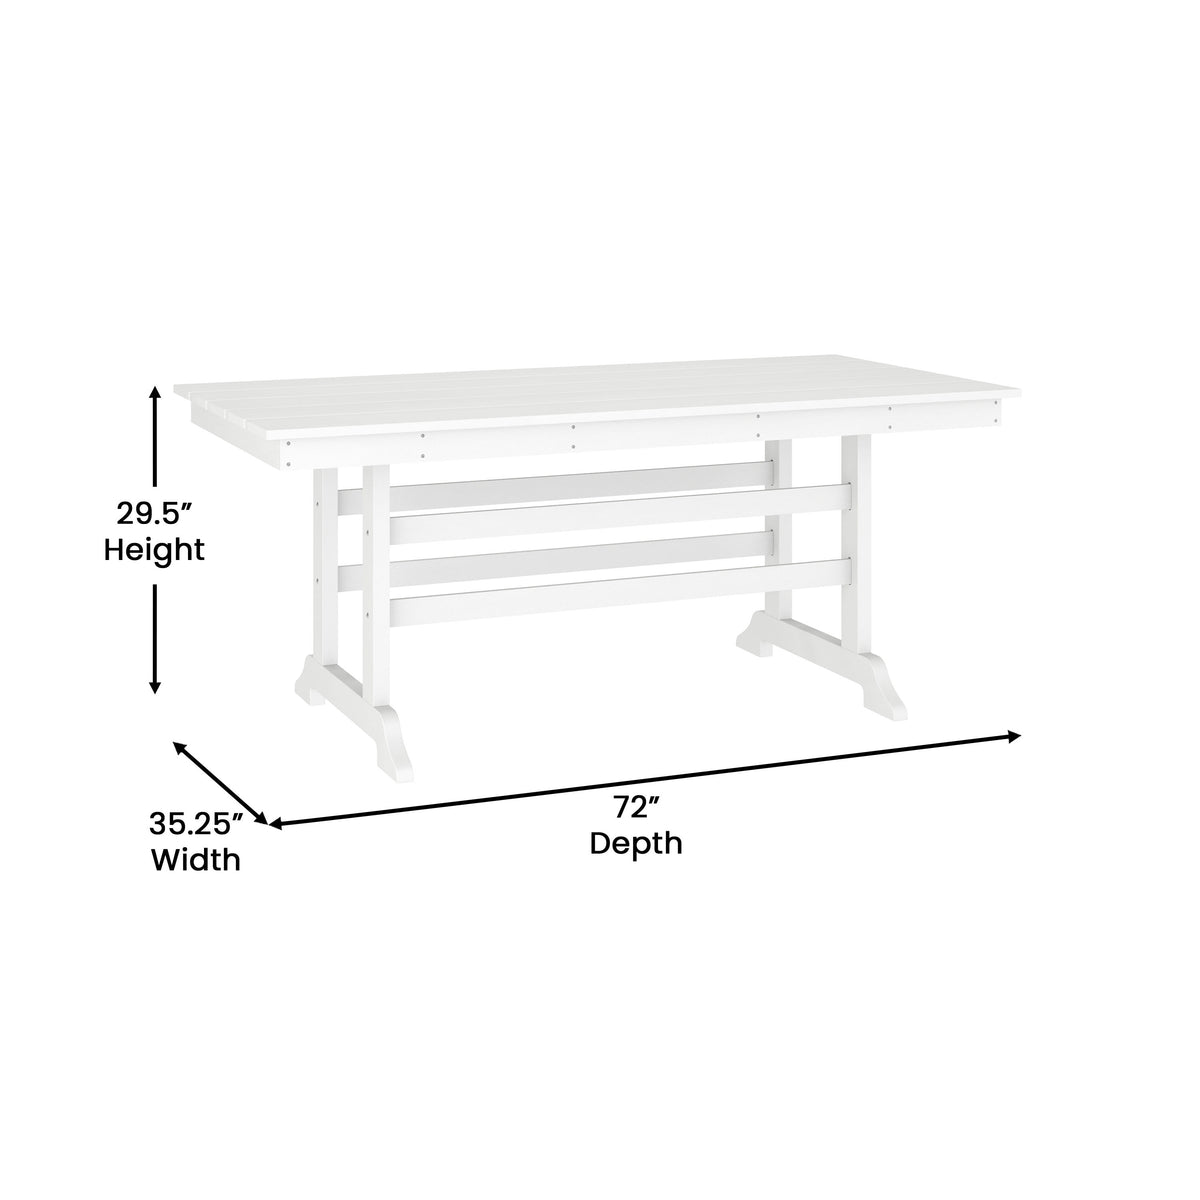 White |#| Commercial Grade Indoor-Outdoor 72" Rectangle Adirondack Style Table in Black